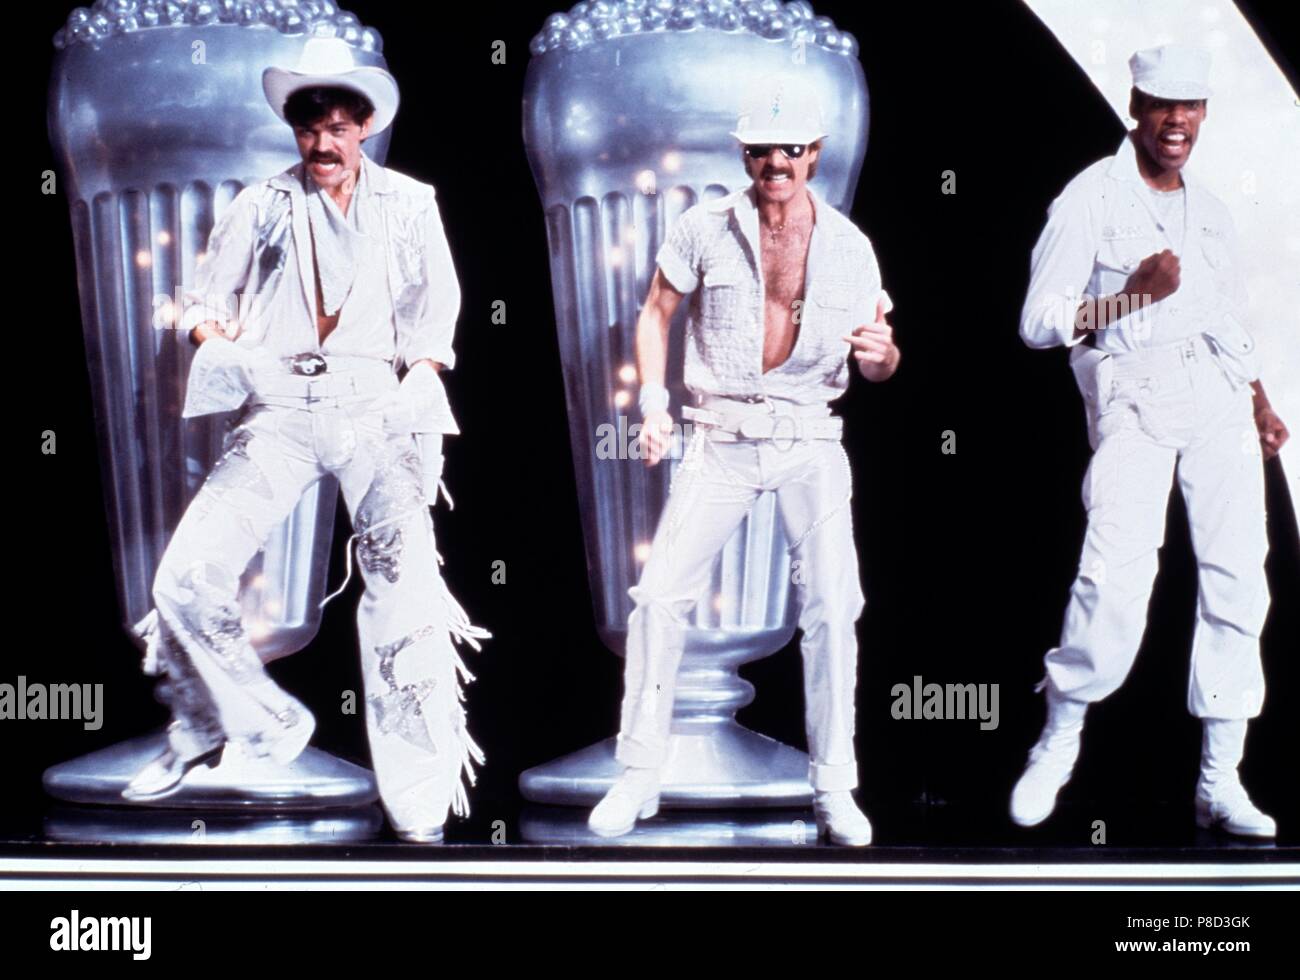 Can't Stop the Music (1982) Village People, Randy Jones as the Cowboy     Date: 1980 Stock Photo